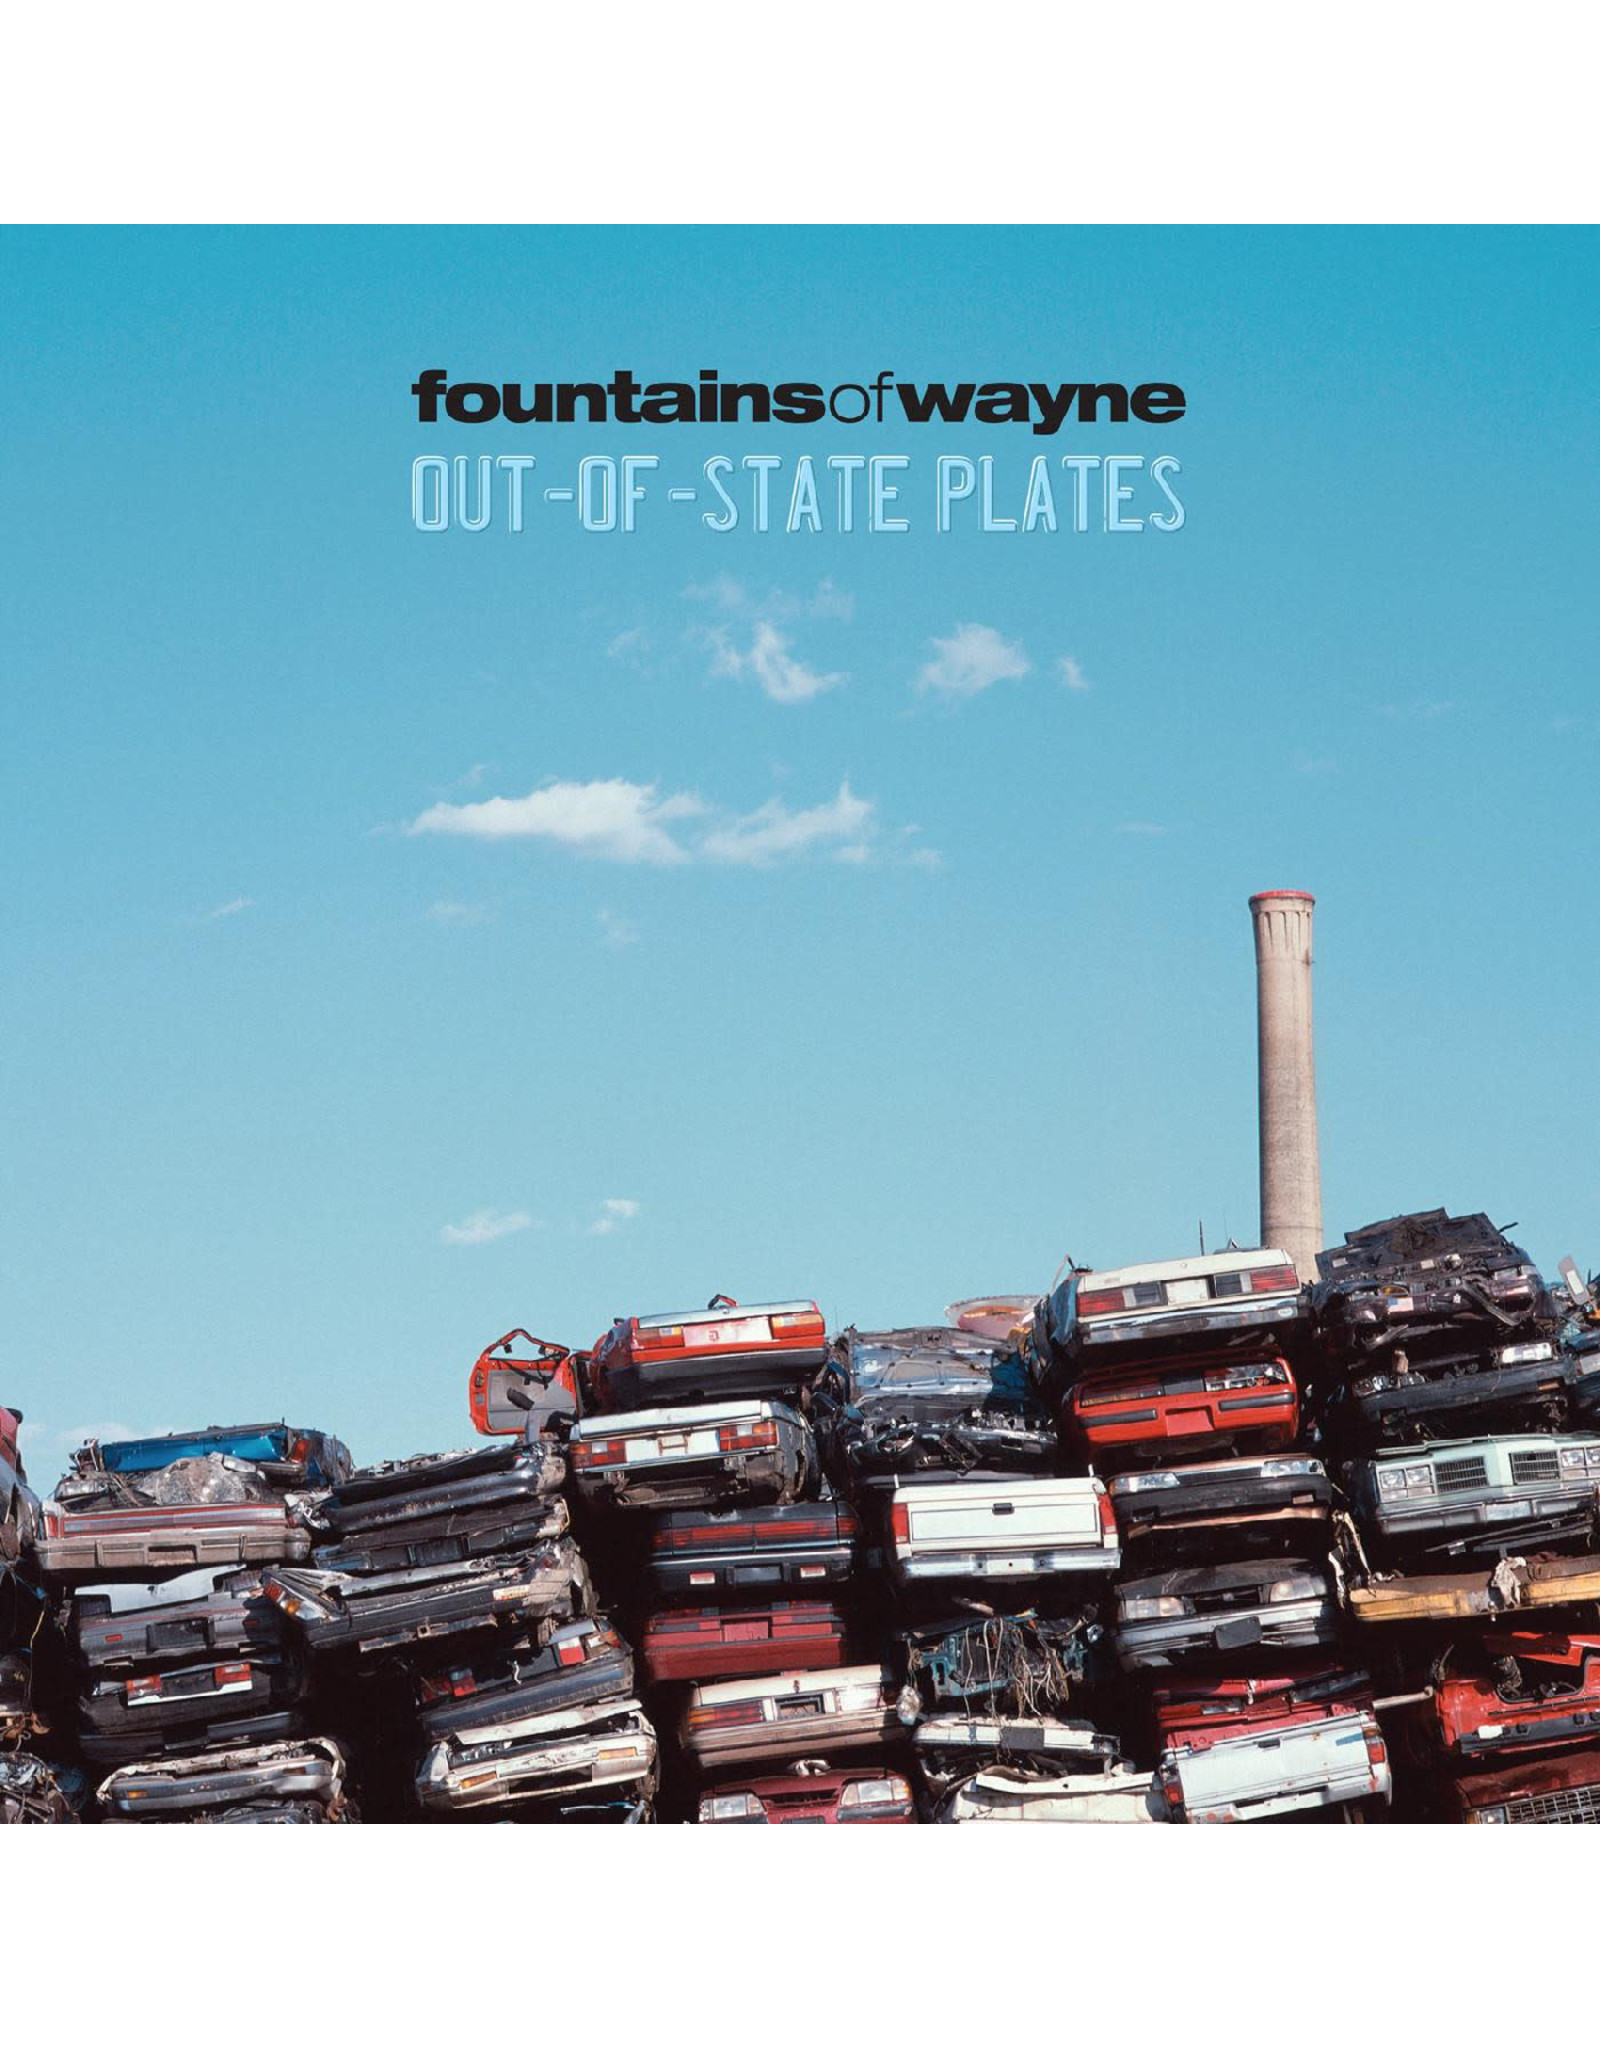 Real Gone Fountains of Wayne: Out-of-State Plates (JUNKYARD SWIRL) LP